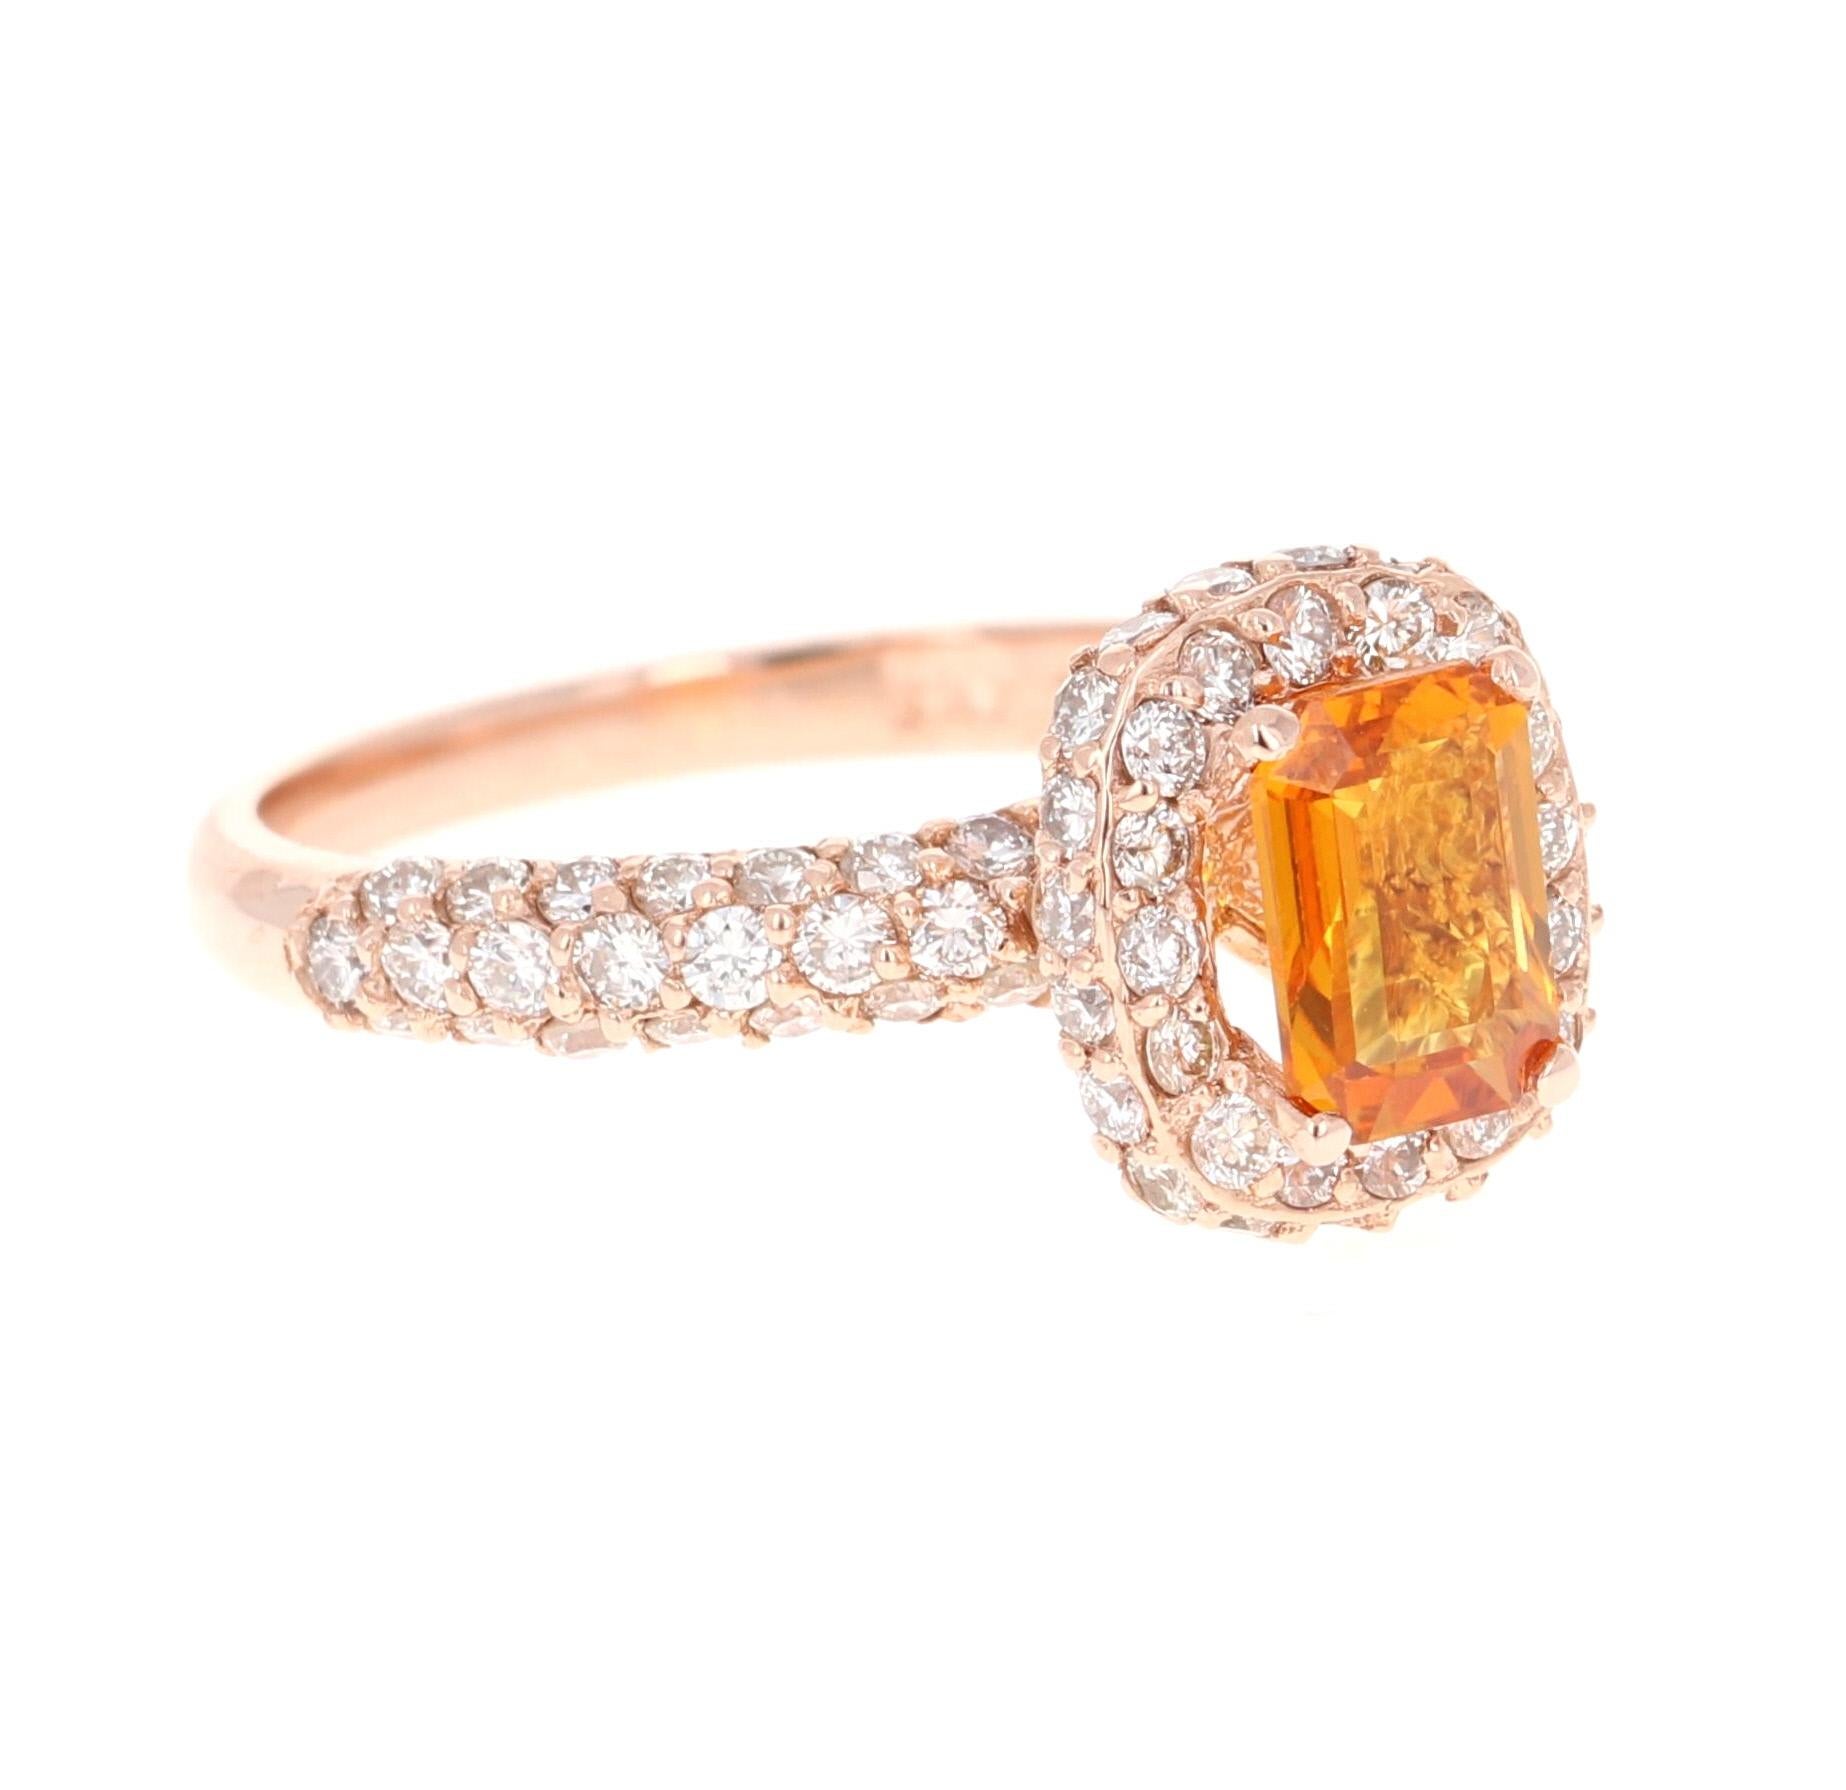 A Unique Orange Sapphire Ring for your collection!

This beautiful ring has Natural Emerald Cut Orange Sapphire that weighs 1.03 Carats and is surrounded 64 Round Cut Diamonds that weigh 0.89 Carats. The total carat weight of the ring is 1.92